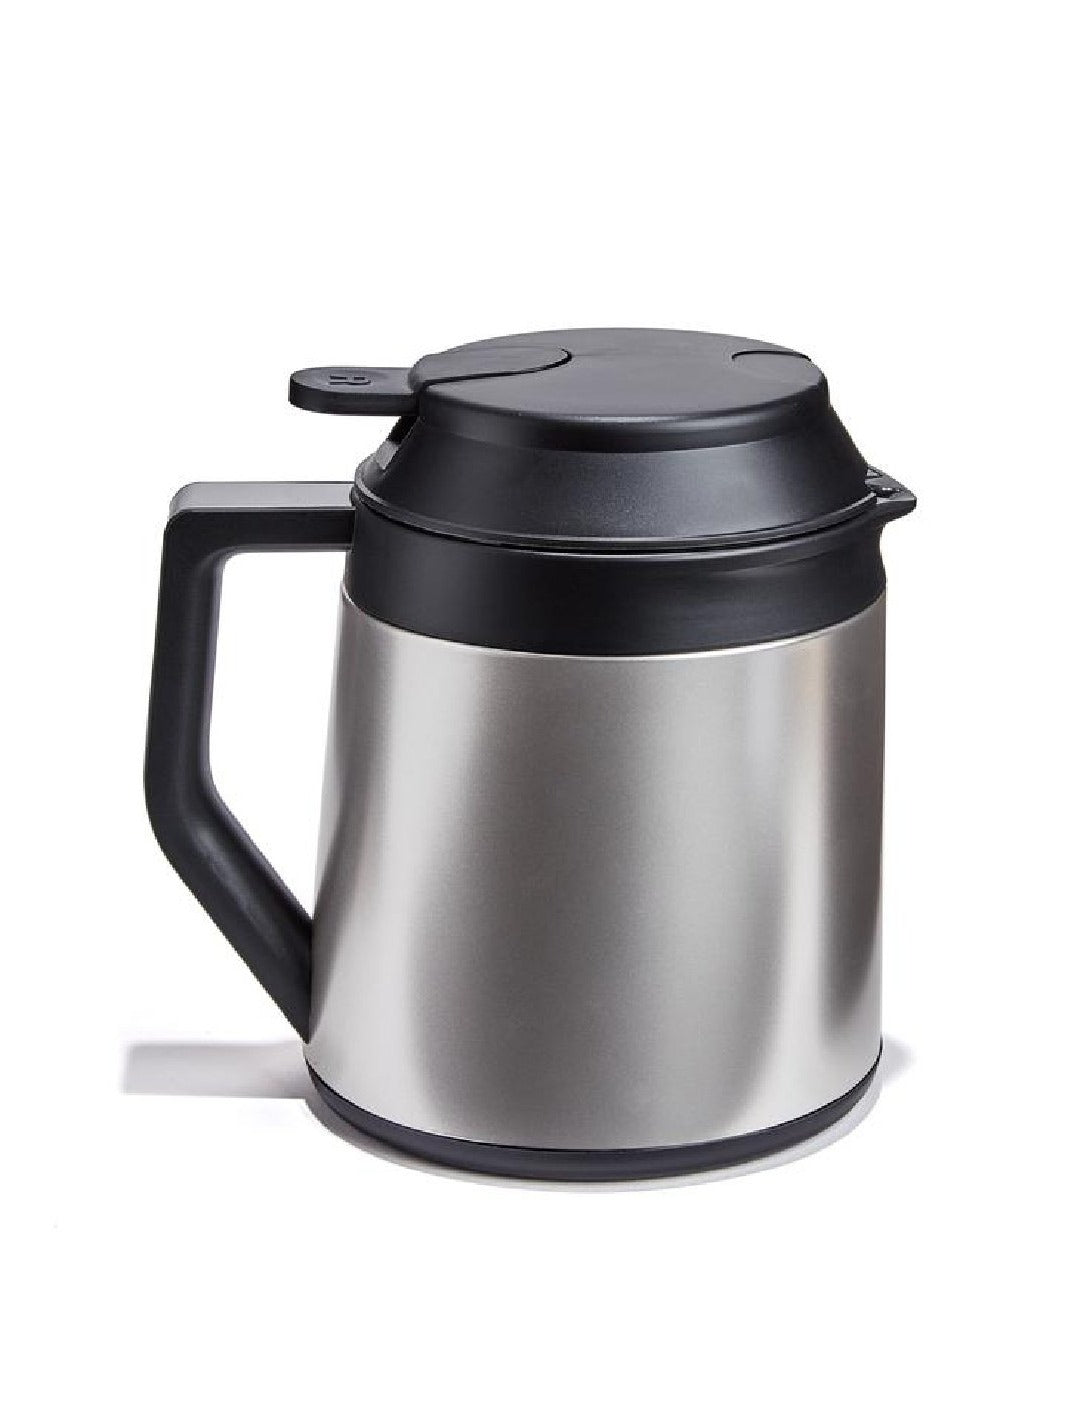 RATIO Six Thermal Carafe and Lid